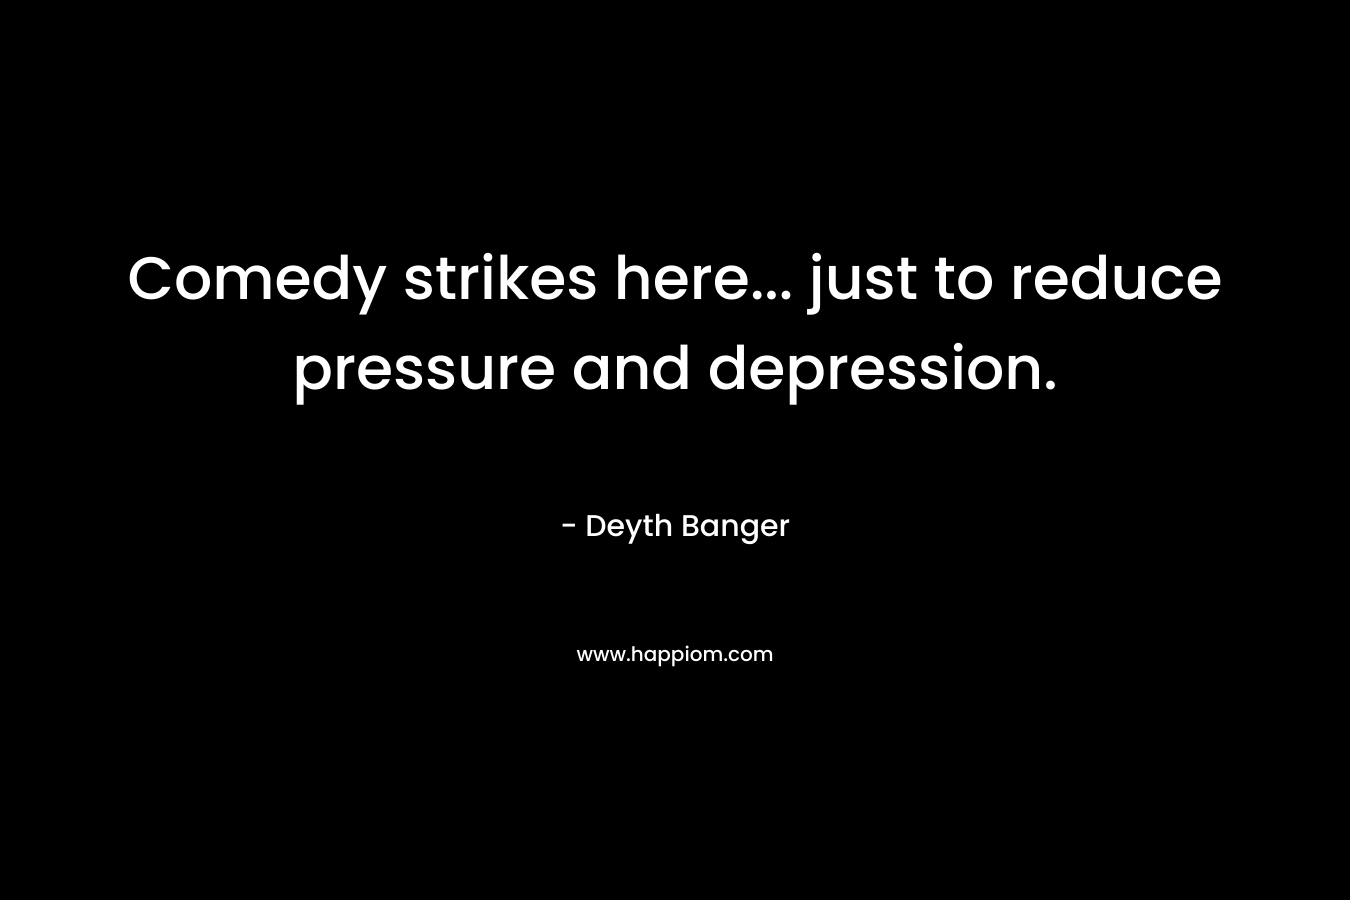 Comedy strikes here... just to reduce pressure and depression.